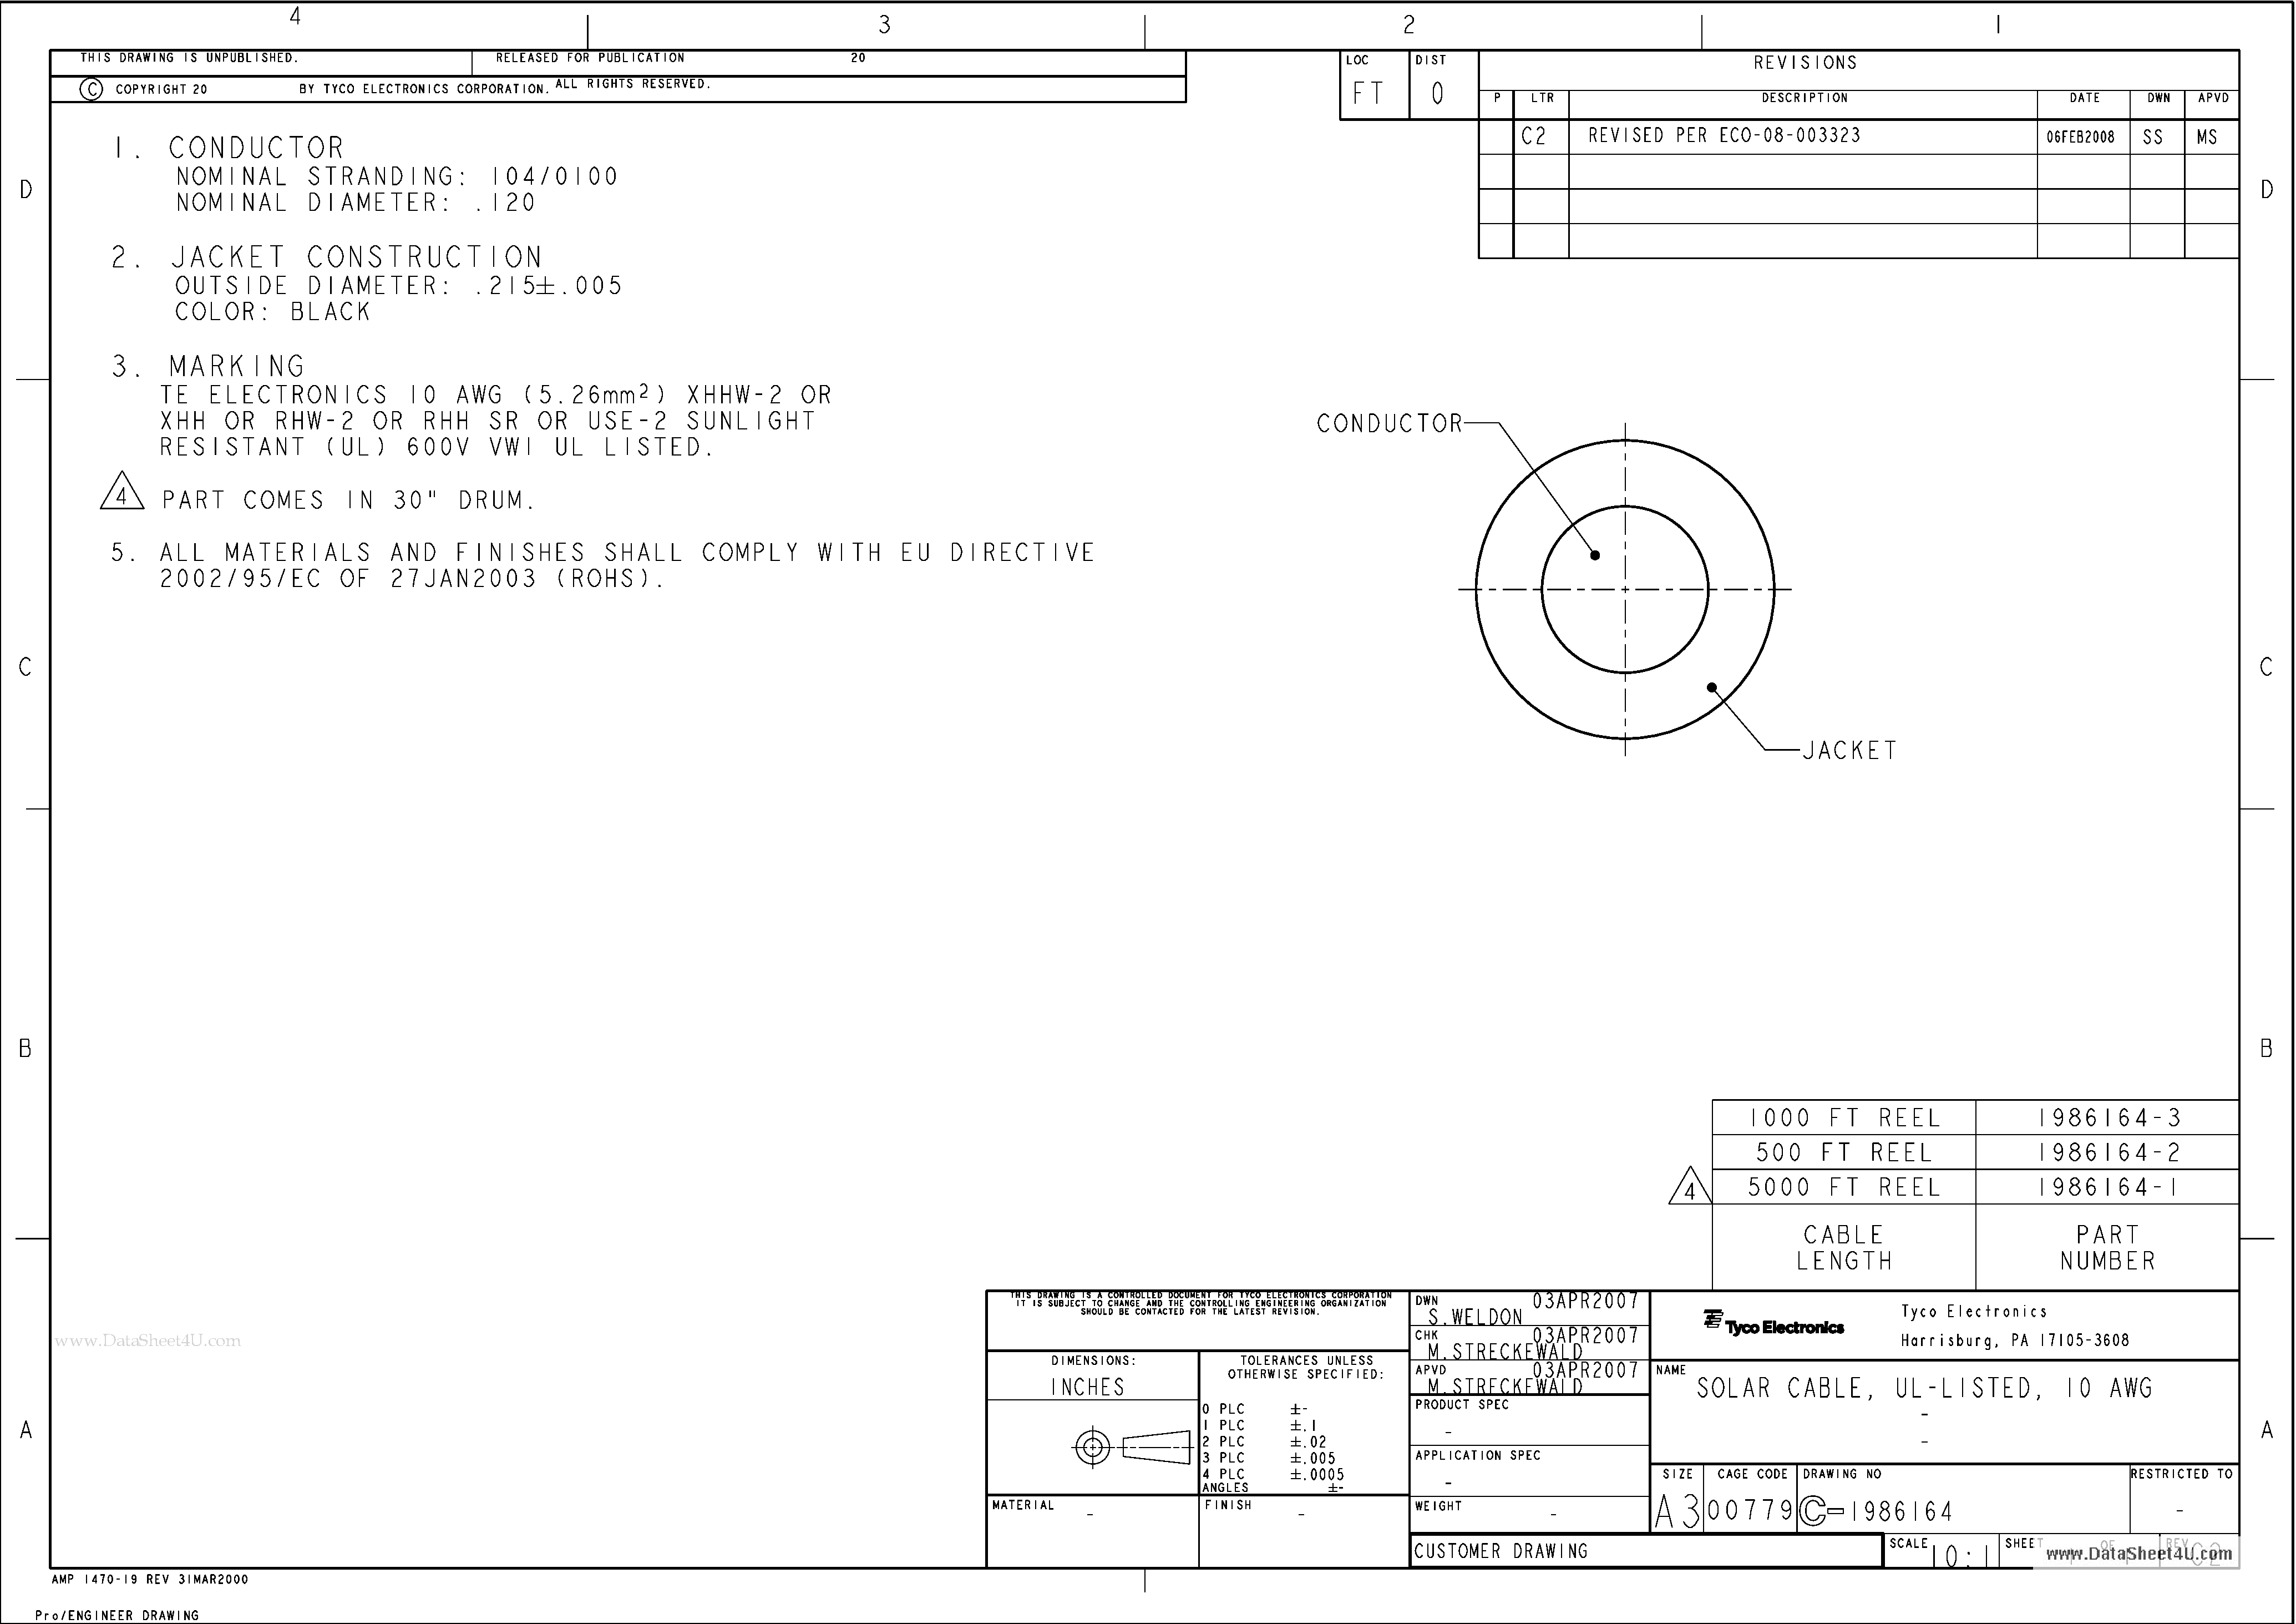 Datasheet C-1986164 - SOLAR CABLE UL-LISTED IO AWG page 1